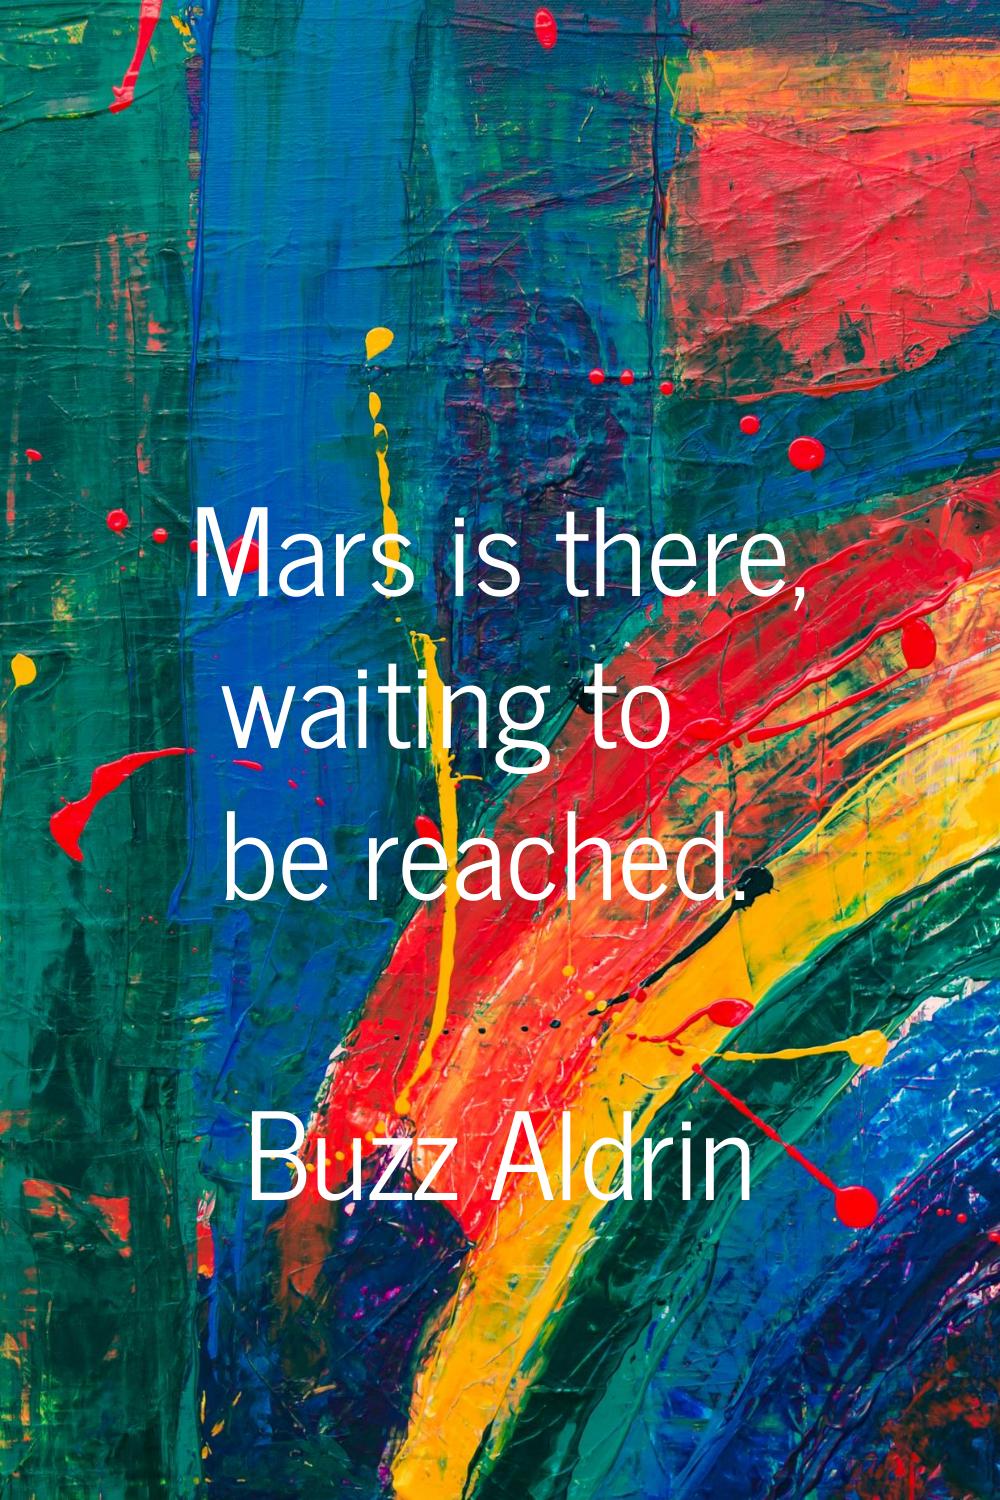 Mars is there, waiting to be reached.